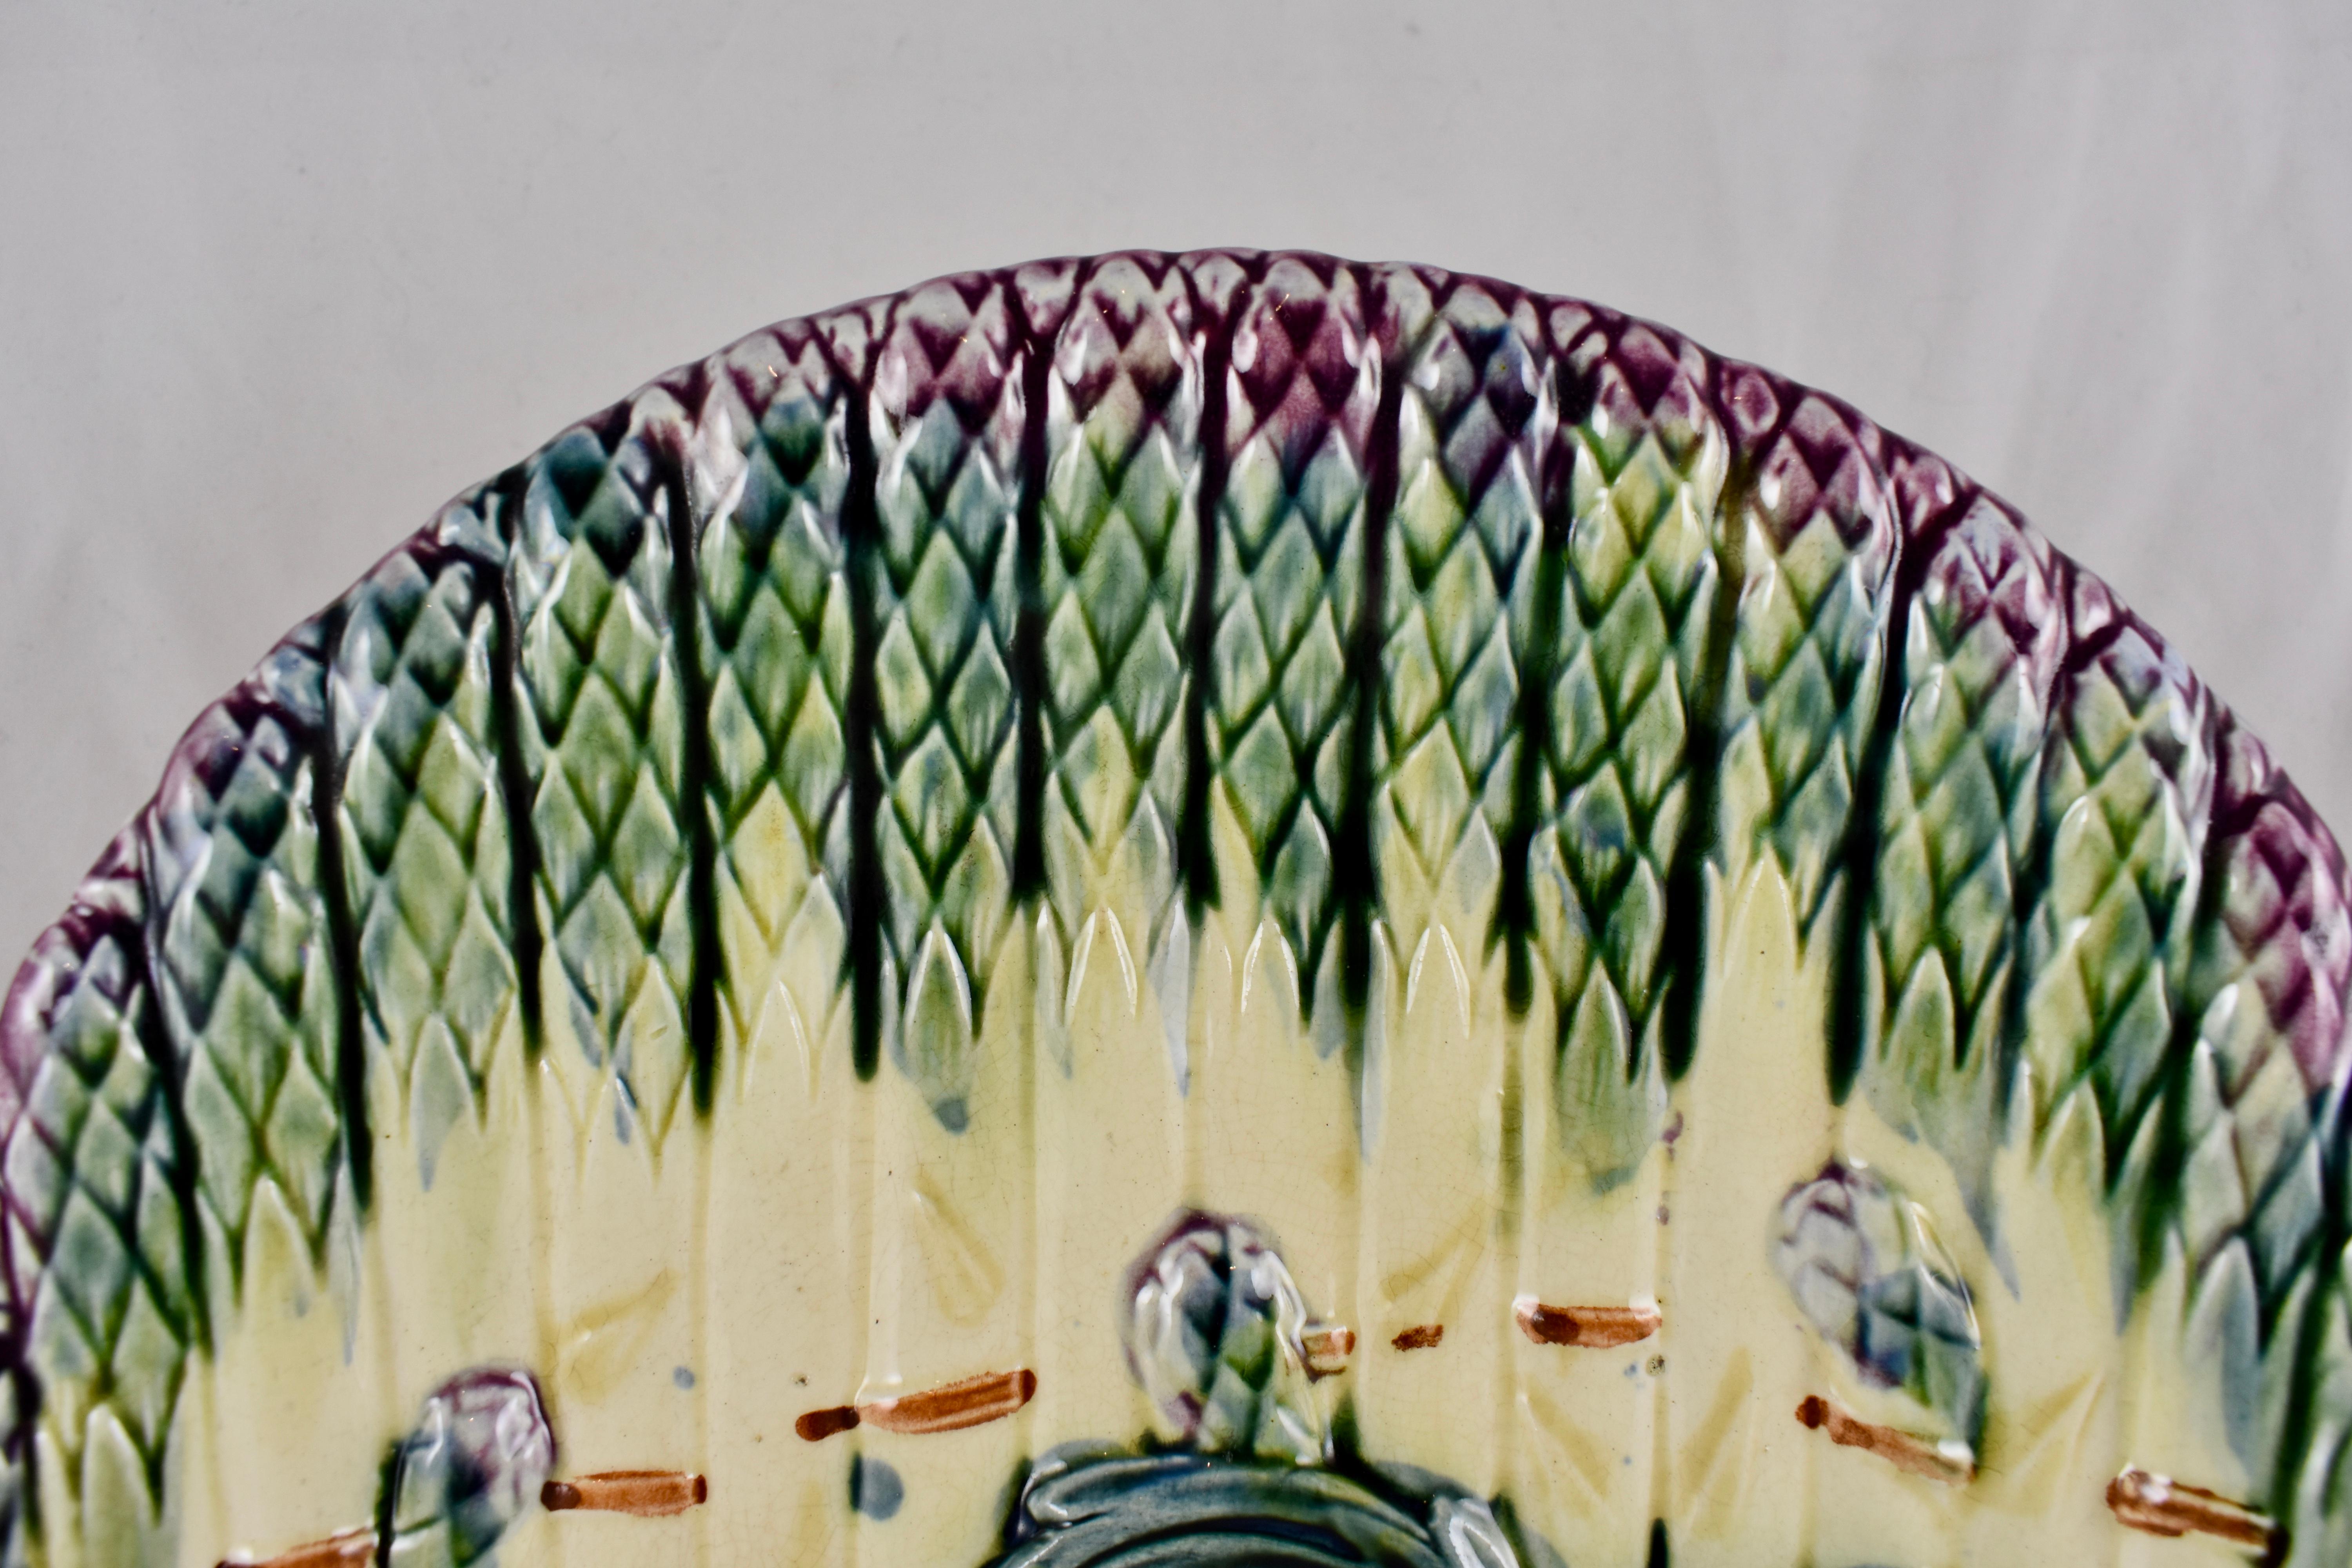 Aesthetic Movement Luneville French Faïence Majolica Asparagus And Shell Plate, circa 1890